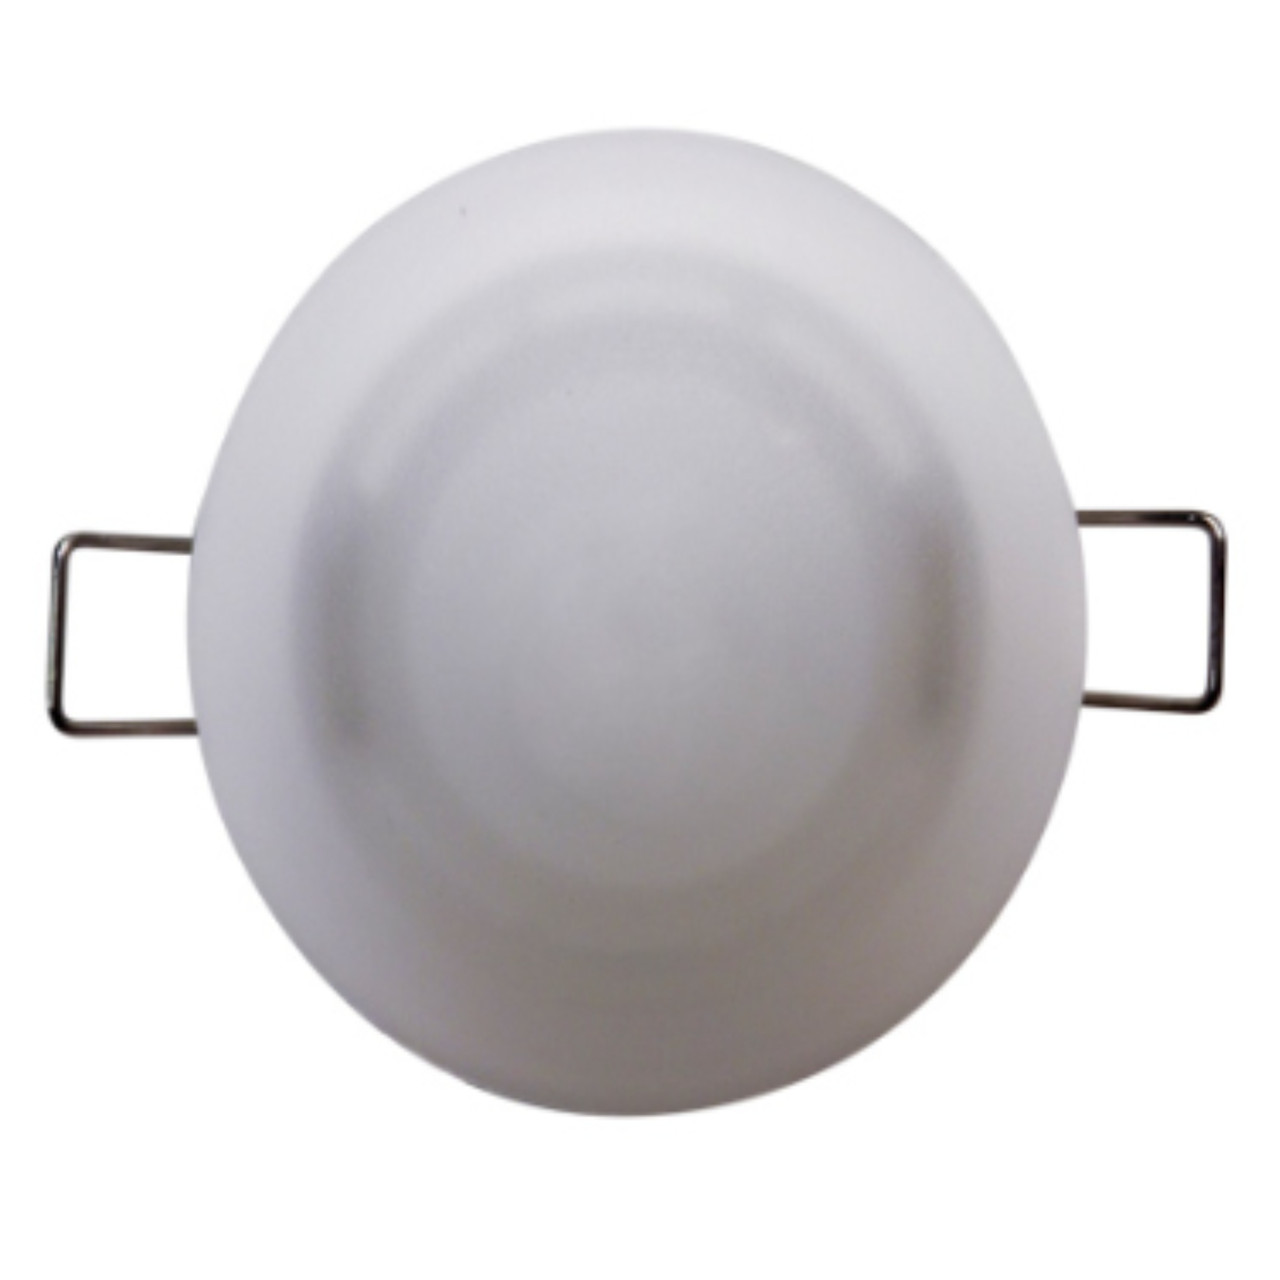 Teqnic New OEM 3 Inch Spring Mounted Warm White Dome Light, E25-M000-1